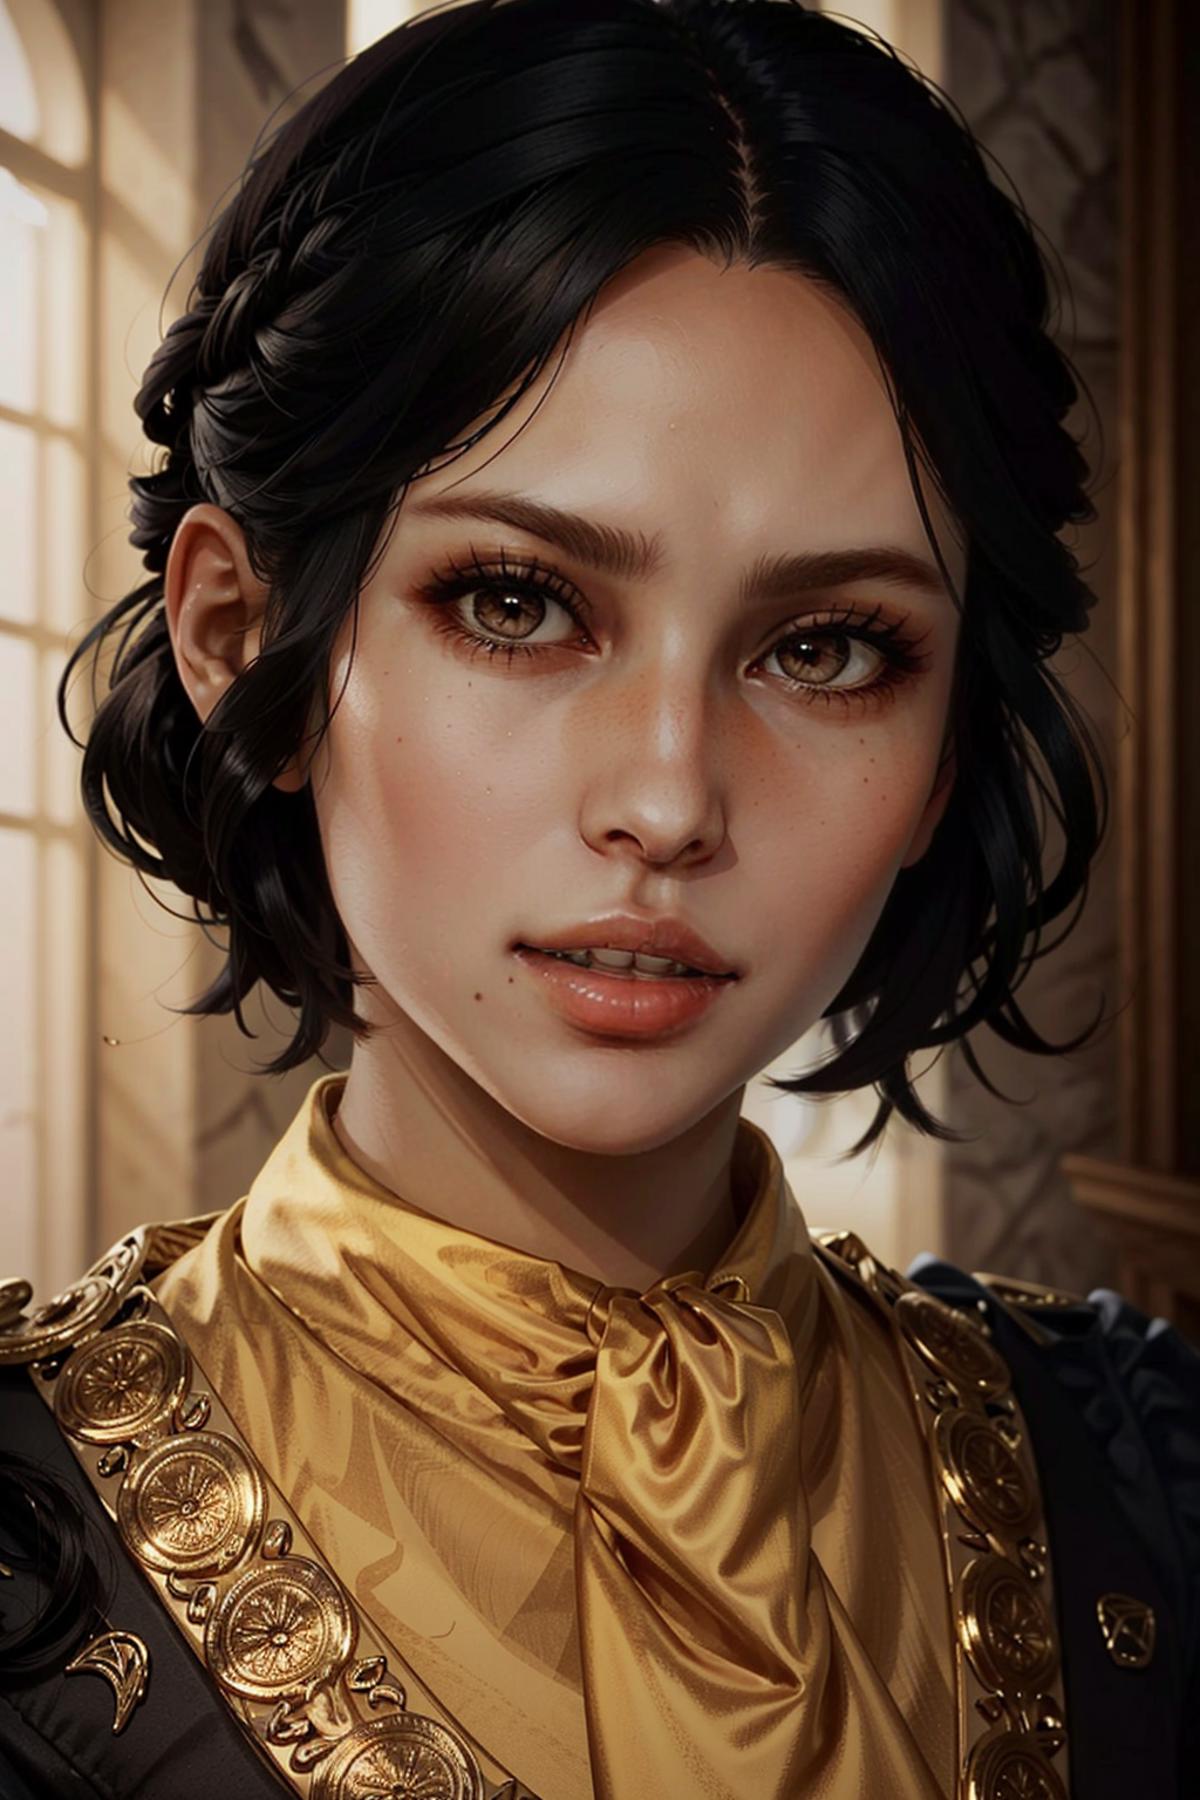 Josephine from Dragon Age: Inquisition image by BloodRedKittie